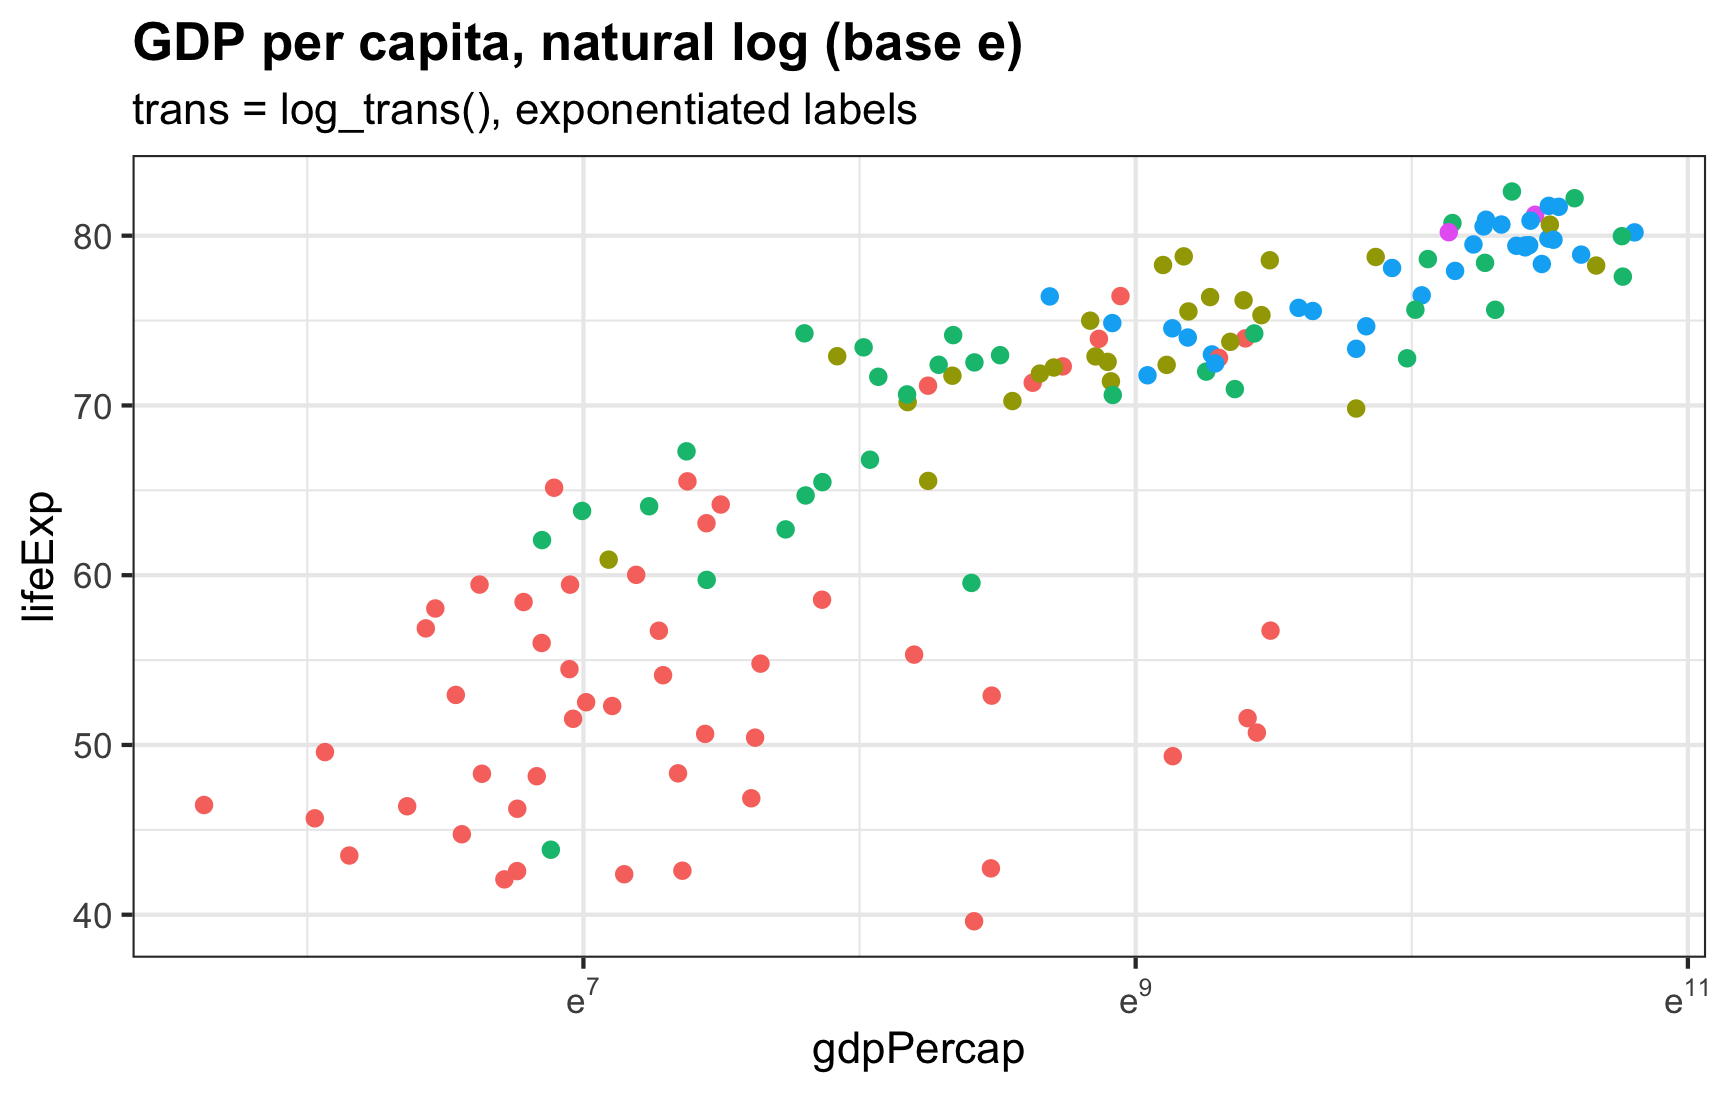 The x-axis now shows GDP per capita scaled to log base $e$, or the natural log, with automatic axis breaks at 7, 9, and 11. The values on the x-axis are logged automatically with `trans = log_trans()`.